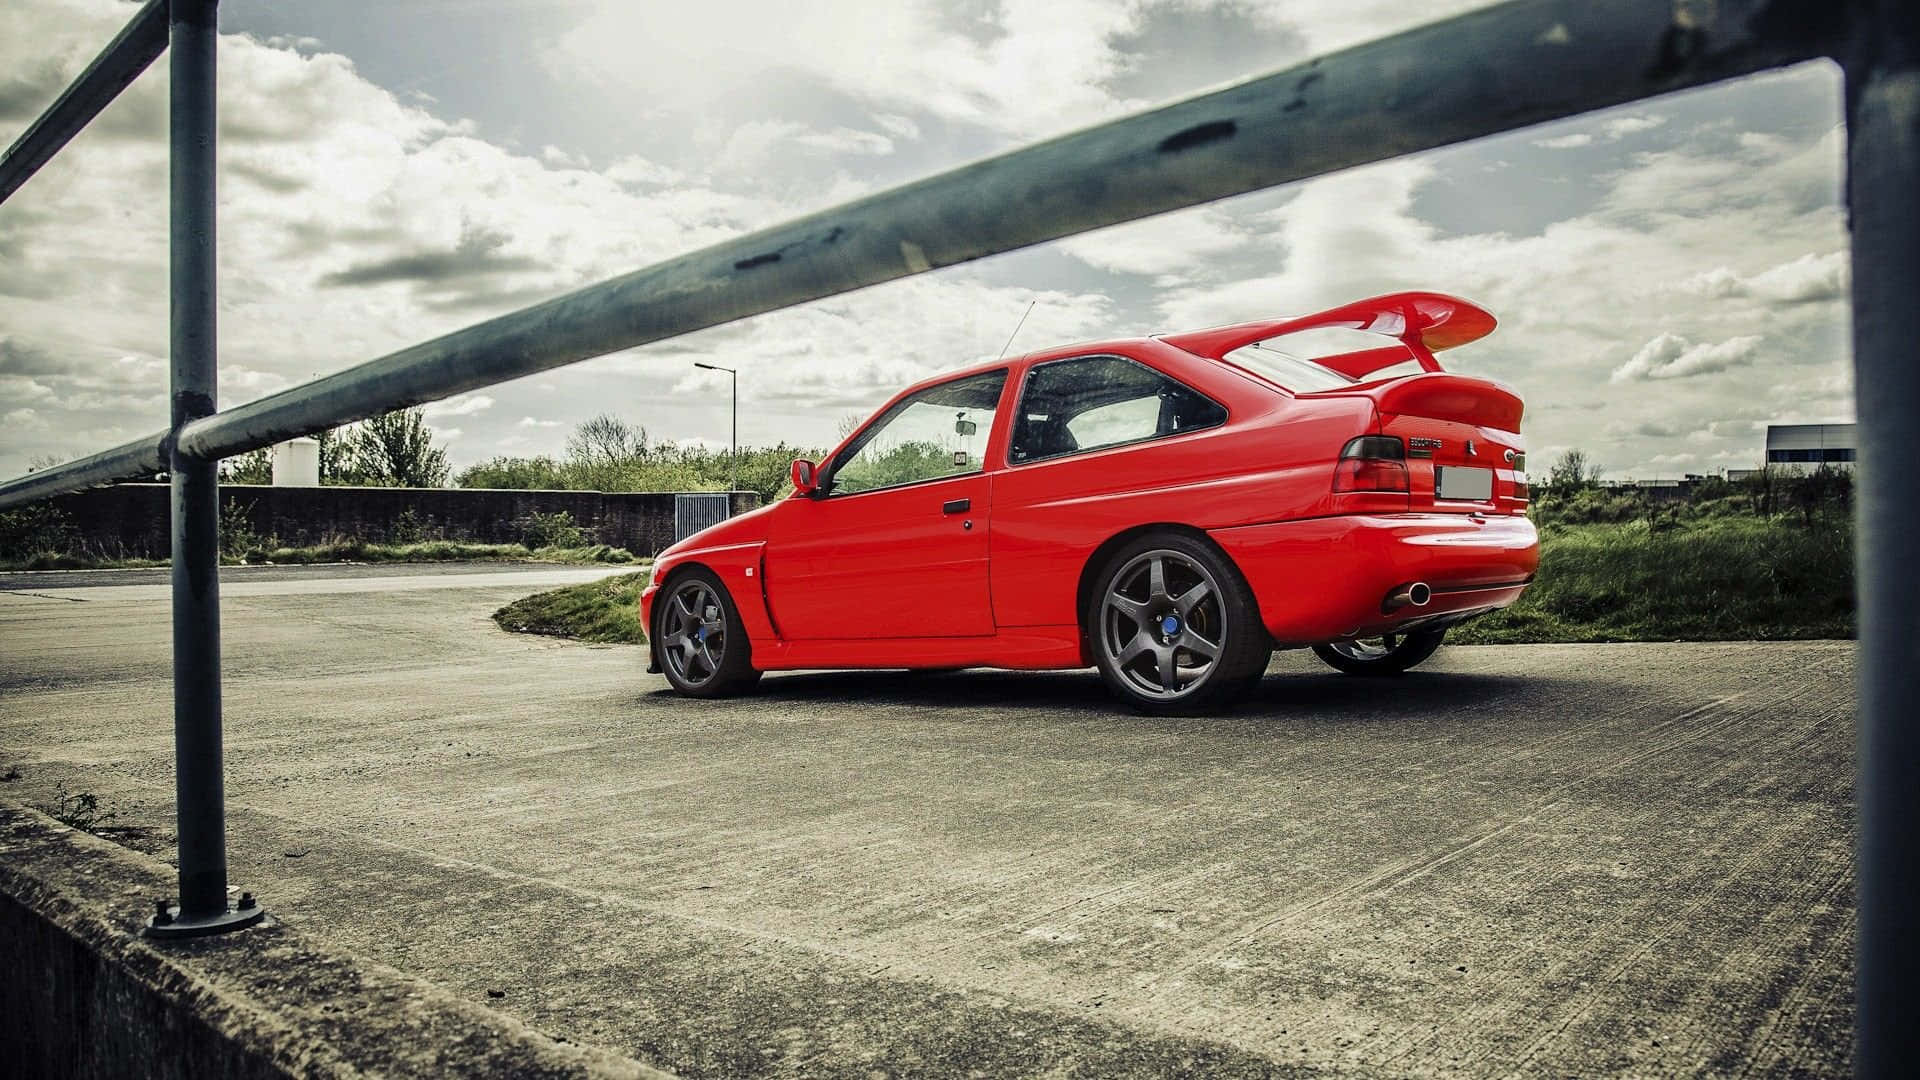 A sleek classic Ford Escort in vivid color with a vibrant background Wallpaper